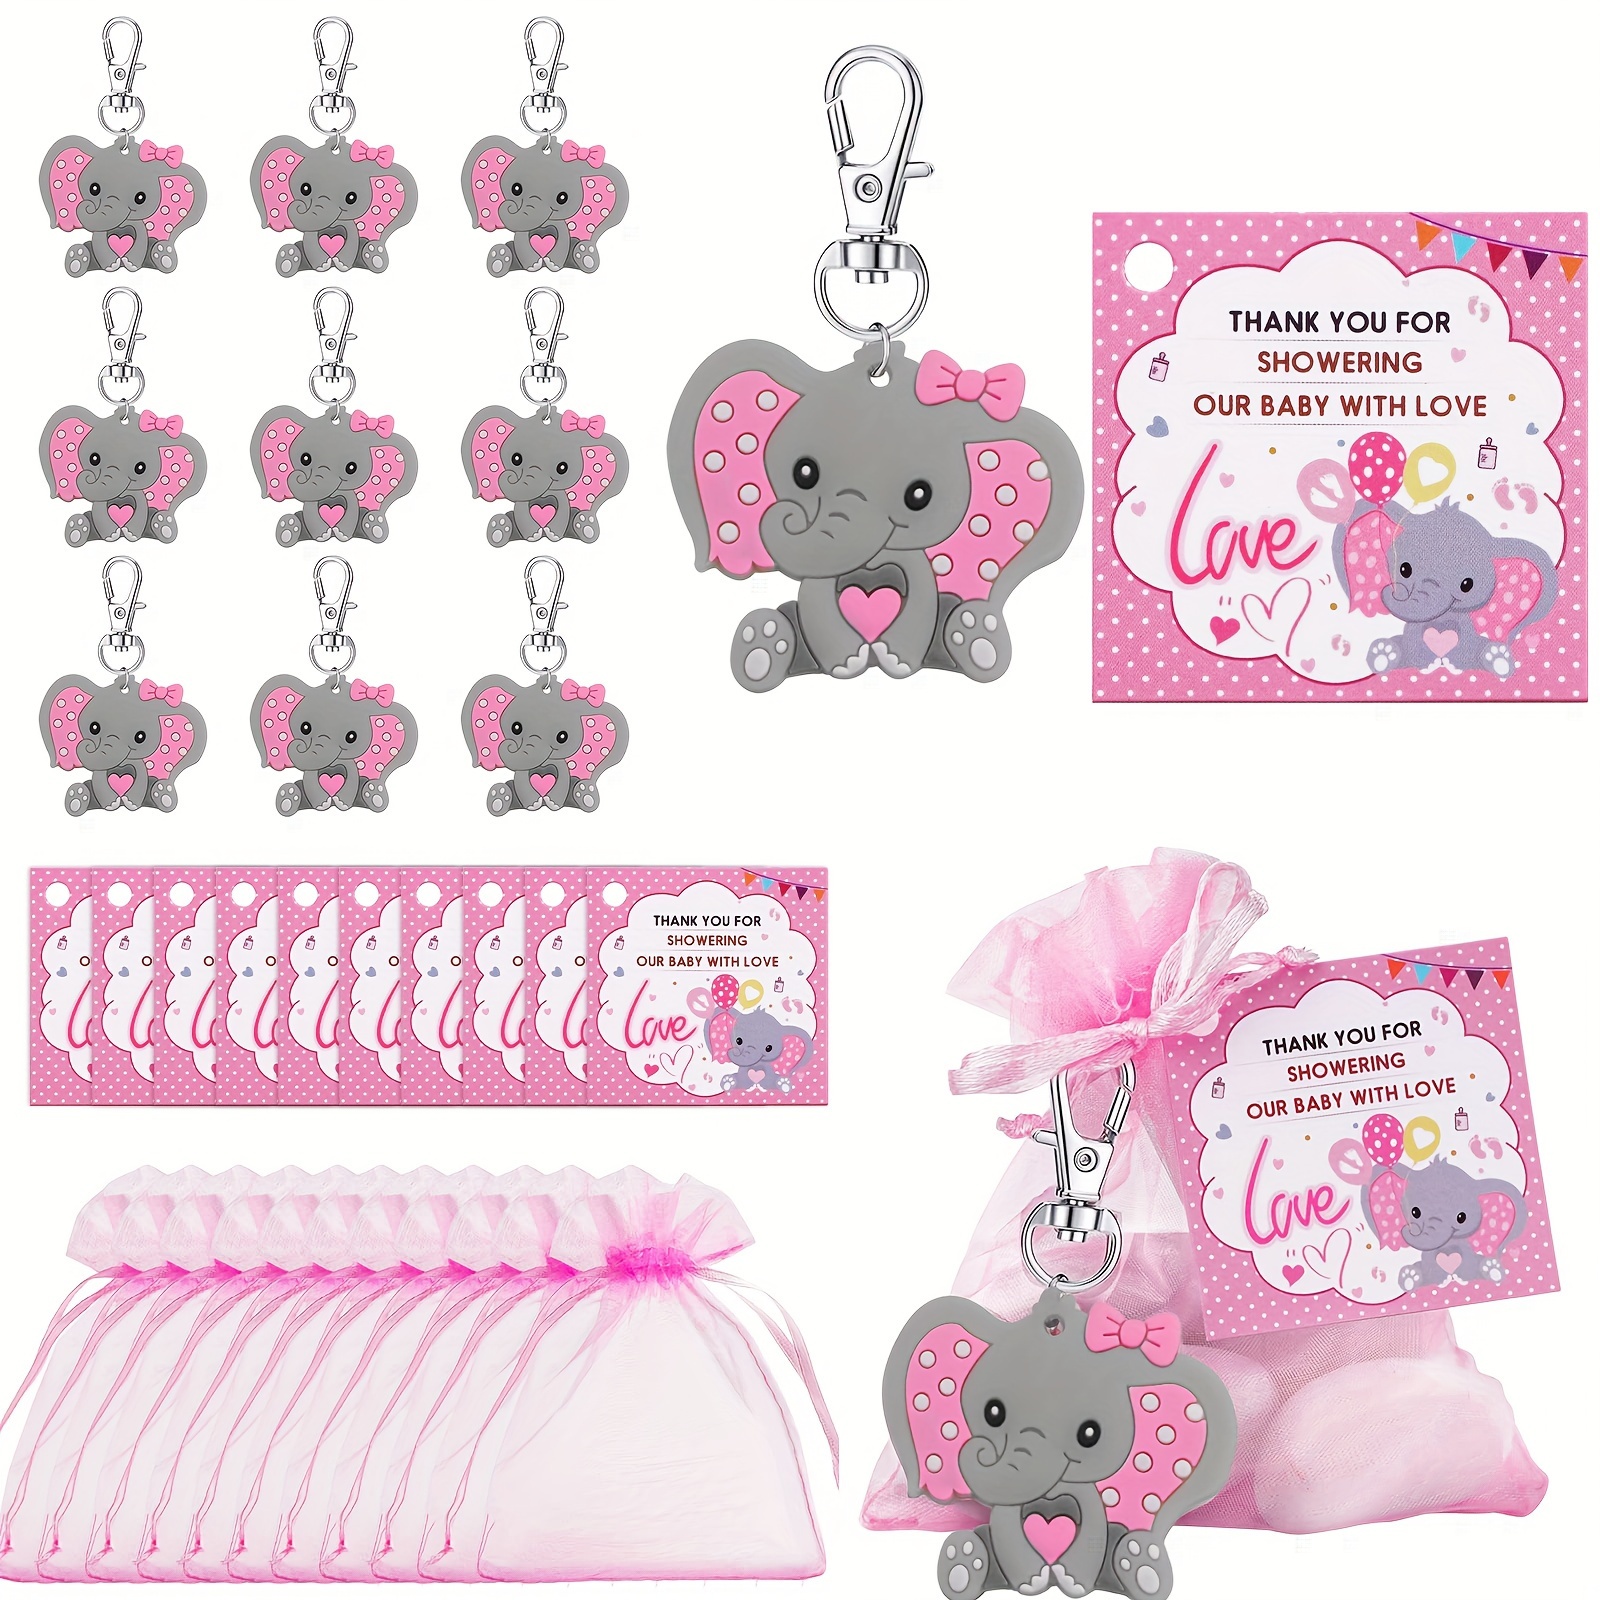 

fantasy Theme" 30-piece Pink Baby Shower Favor Set - Includes Elephant Keychains, Drawstring Gift Bags & Thank You Cards For Guests